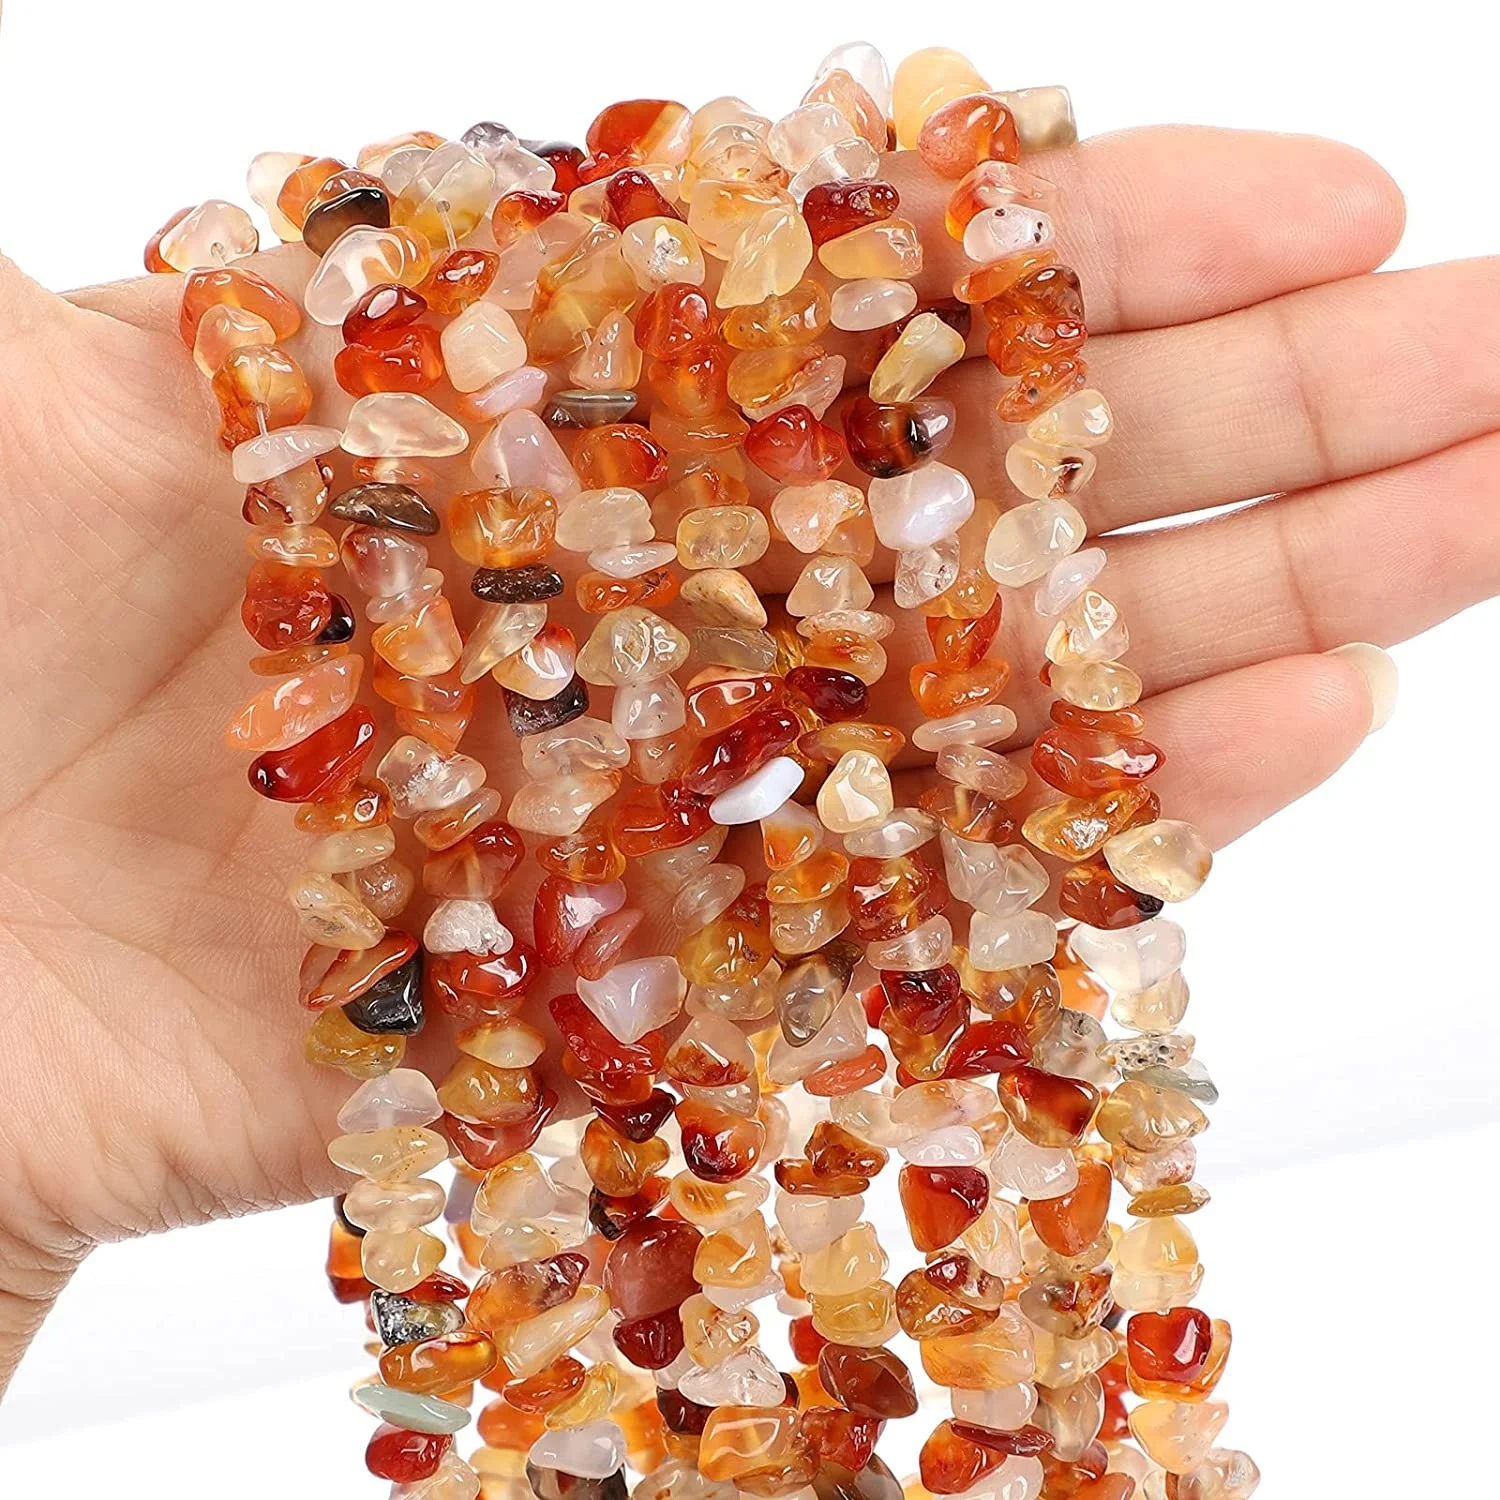 

Crystals Stone Beads for Jewelry Making,Natural Red Agate Chip Stone Beads,5-8 MM Irregular Gemstones Bulk Sales